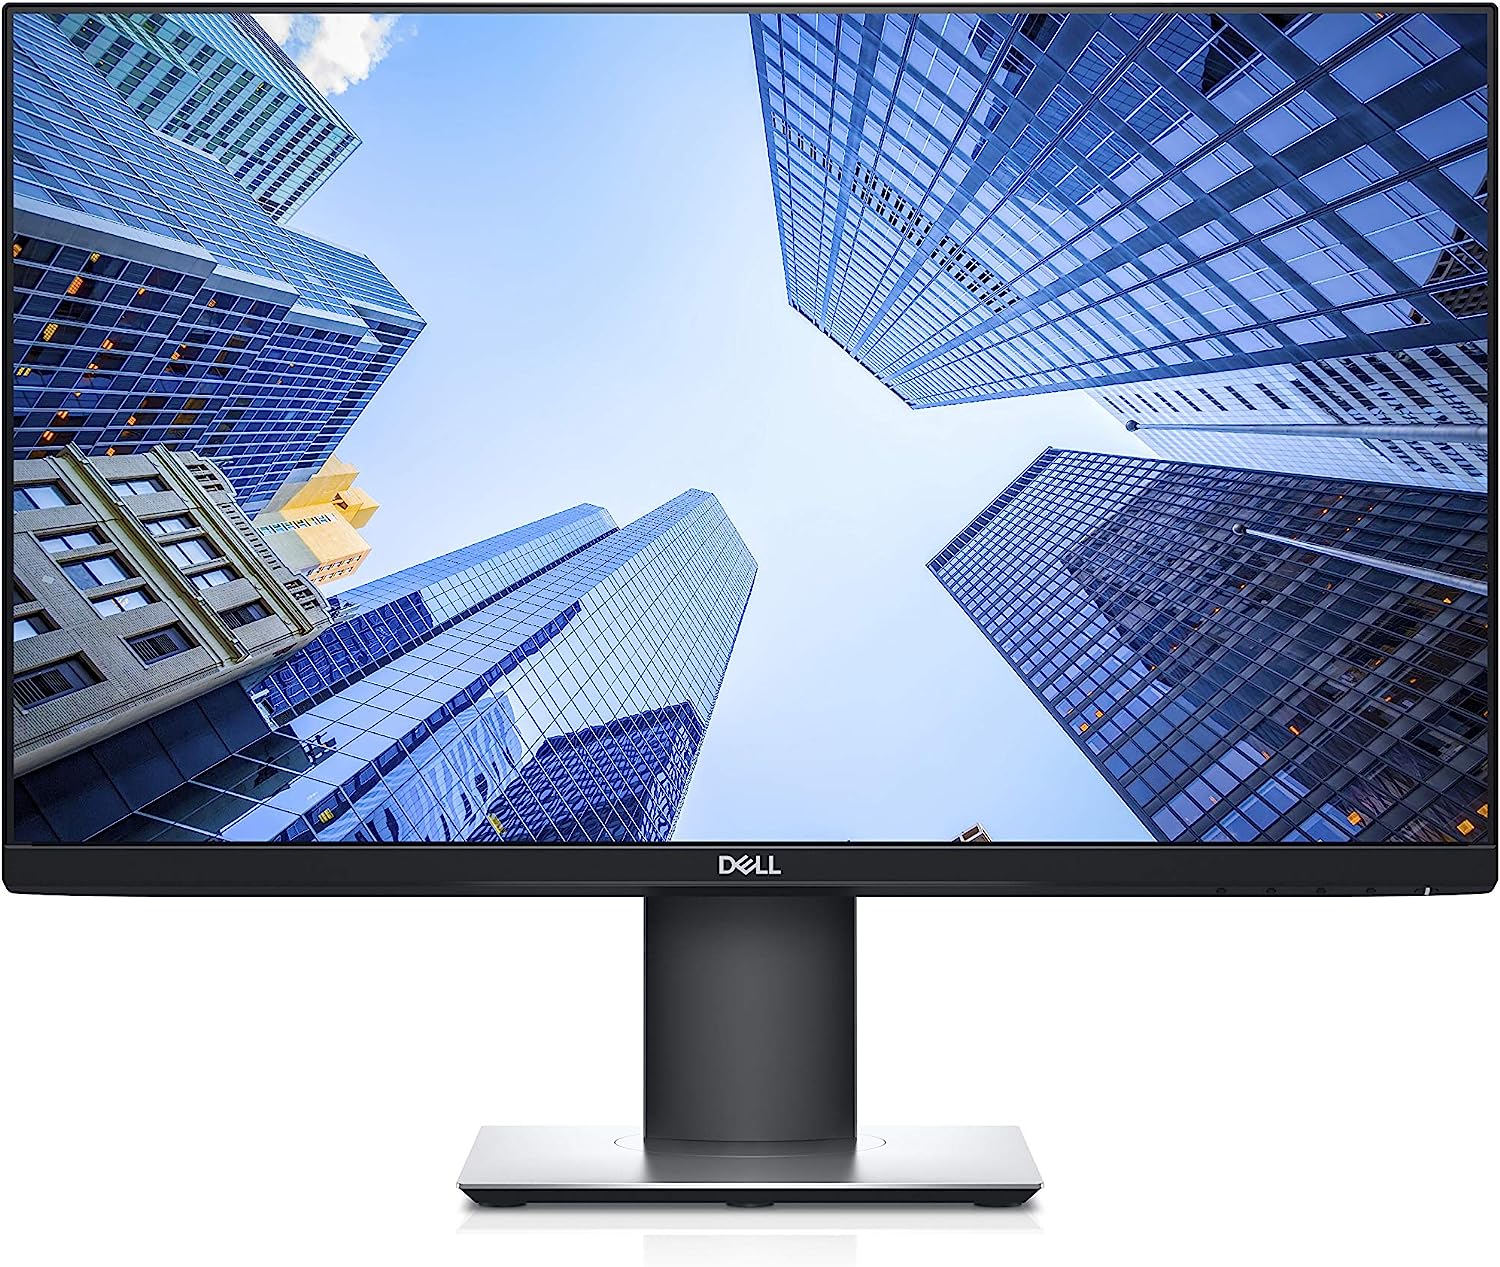 Refurbished(Good) - Dell P2419H 24" Widescreen 1920x1080 FHD Ultrathin Bezel LED-backlight LCD IPS Monitor